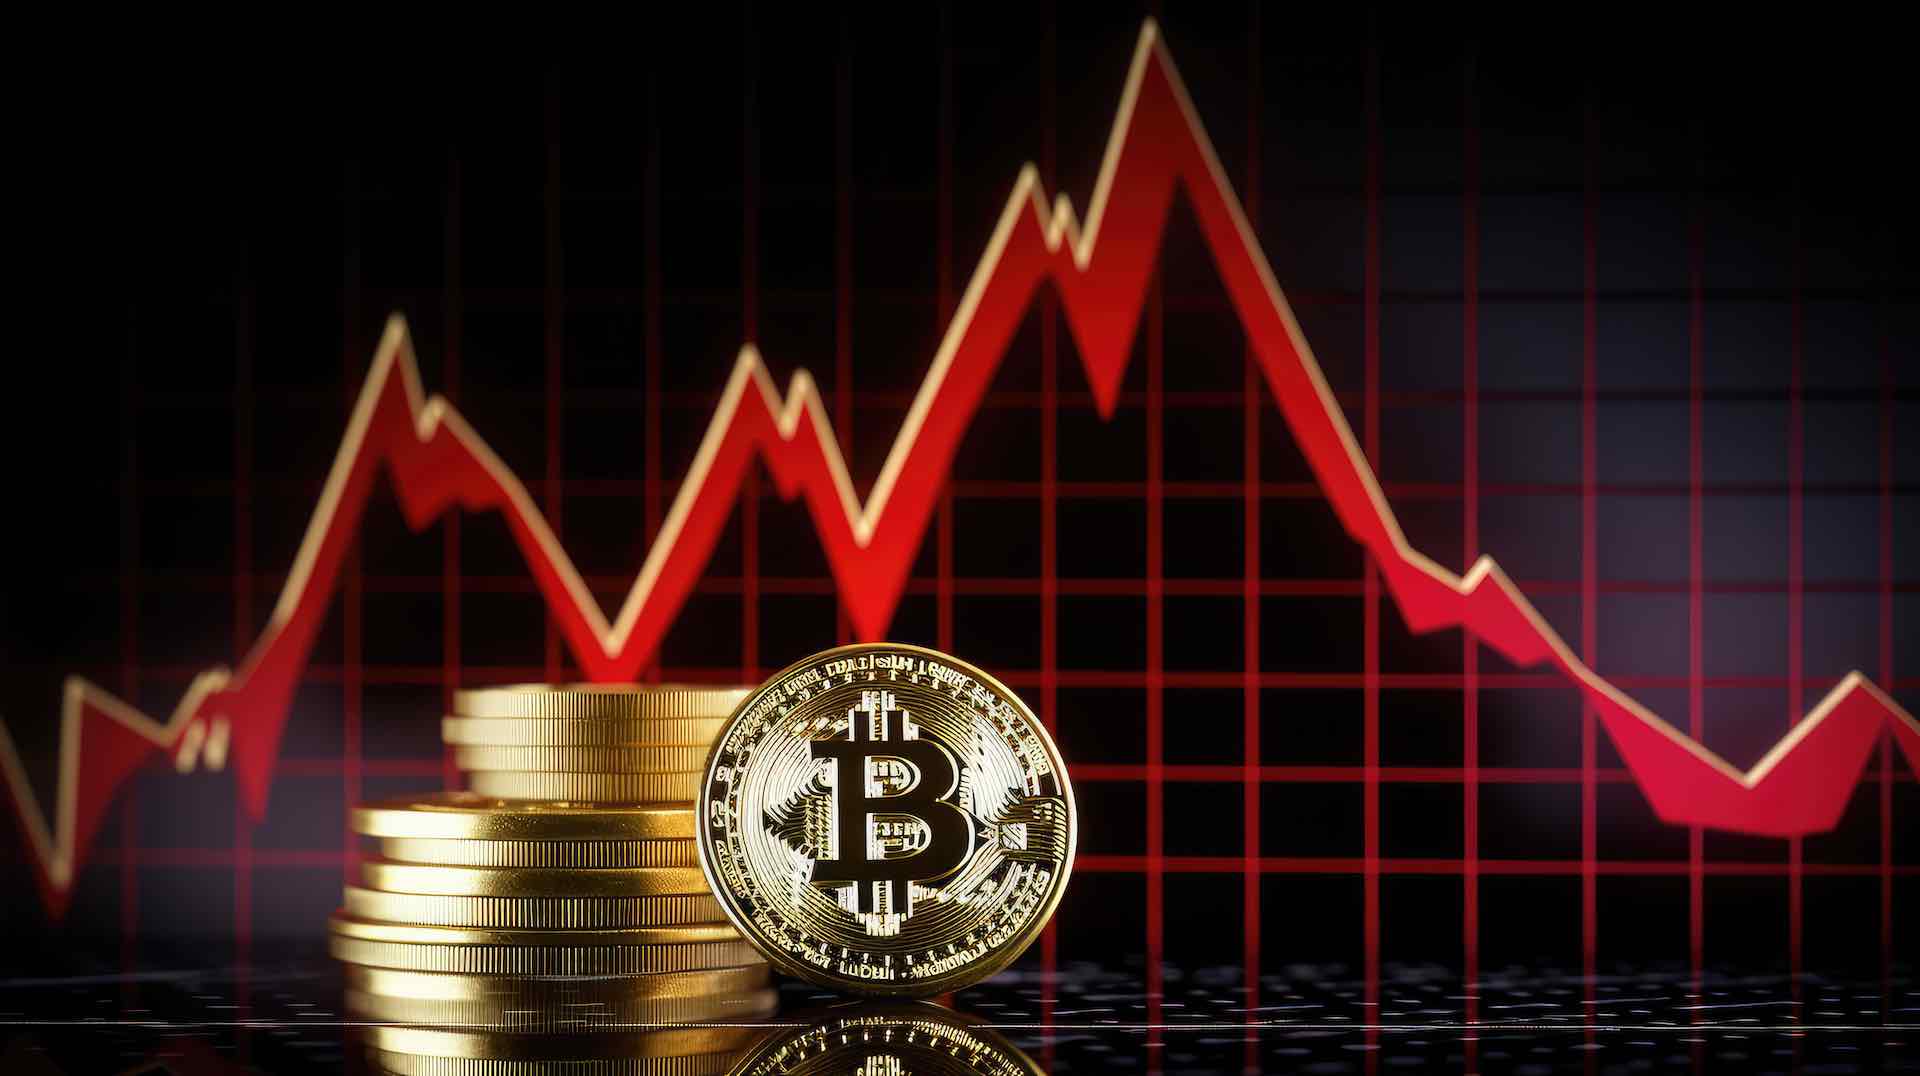 Bitcoin experienced a significant drop of $5,000 within a span of 24 hours, as interest rates surged, marking the second consecutive day of decline for the cryptocurrency at the outset of the new month and quarter. This decline was influenced by the rising Treasury yields and the strengthening of the U.S. dollar. According to Coin Metrics, the flagship cryptocurrency plummeted by more than 6% on Tuesday, settling at $65,150.00, thereby accumulating a two-day loss of approximately 7%. This decline commenced after a trading period where Bitcoin was valued at around $70,000 on Monday morning. The dip was attributed to the release of data indicating growth in the manufacturing sector for the first time since September 2022 and a decrease in investor speculation regarding potential rate cuts in June. As a result, Bitcoin's value has retreated by about 11% from its all-time high recorded on March 14. Ether, another significant cryptocurrency, mirrored Bitcoin's decline by losing 6% of its value, reaching a trading price of $3,240.27. Simultaneously, the 10-year U.S. Treasury yield surged to its highest point of the year, while the U.S. dollar, which typically moves inversely to Bitcoin, reached its peak in almost five months. Analysts attributed Bitcoin's correction partly to the robust performance it exhibited in the first quarter. Joel Kruger, a market strategist at LMAX Group, stated, "Bitcoin doesn’t need much excuse to go through a period of correction after such an explosive performance in Q1." He further explained that the recent strength in U.S. economic data, coupled with persisting inflation concerns, led to a reevaluation of Federal Reserve expectations, resulting in increased demand for the U.S. dollar due to more attractive yield differentials. The drop in Bitcoin's value might have been exacerbated by a significant transfer of over 4,000 bitcoins to the Bitfinex exchange by a large holder, commonly referred to as a "whale." Data from CryptoQuant highlighted a surge in the exchange's reserves, typically indicating heightened selling activity, coinciding with the sudden decline in Bitcoin's price late Monday night. This decline also had a ripple effect on stocks linked to the performance of Bitcoin. Notably, cryptocurrency exchange Coinbase saw a 4% decrease, while software provider MicroStrategy, which closely correlates with Bitcoin's price movements, experienced a nearly 7% drop. Mining-related stocks such as Marathon Digital and Riot Platforms witnessed losses of 7% and 6%, respectively, while CleanSpark, a prominent miner in 2024, slid by 6%. Looking ahead, April could prove to be a tumultuous period for cryptocurrencies and associated stocks, particularly mining companies. Investors are keeping a close eye on the upcoming Bitcoin halving event, slated for the second half of the month. This event is expected to reduce miner rewards and subsequently impact their revenue. Moreover, while the recent dip in Bitcoin's value may raise concerns among investors, it's essential to consider the broader trajectory of its performance. Despite the recent market turbulence, Bitcoin has maintained a positive trajectory throughout the year. As of now, Bitcoin has recorded a notable 53% increase in value since the beginning of 2024, signaling continued interest and confidence in the cryptocurrency among investors and market participants alike. Bitcoin's ability to weather fluctuations and demonstrate consistent growth reflects its enduring relevance and appeal to investors seeking exposure to alternative assets.